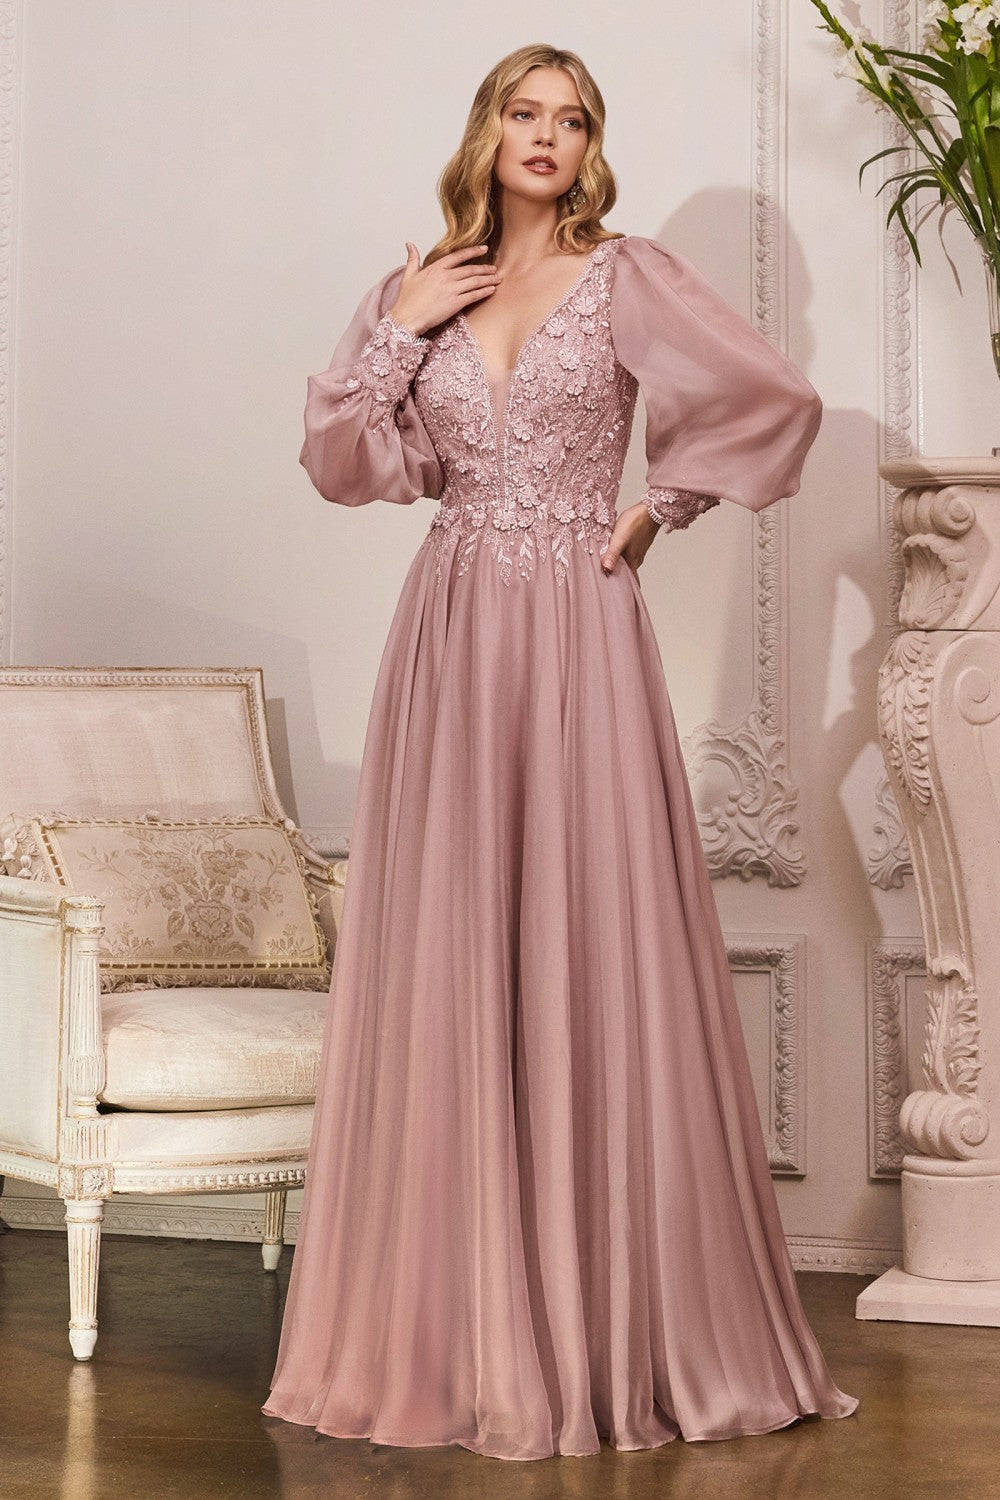 Mother of the Bride Dress Style #27098